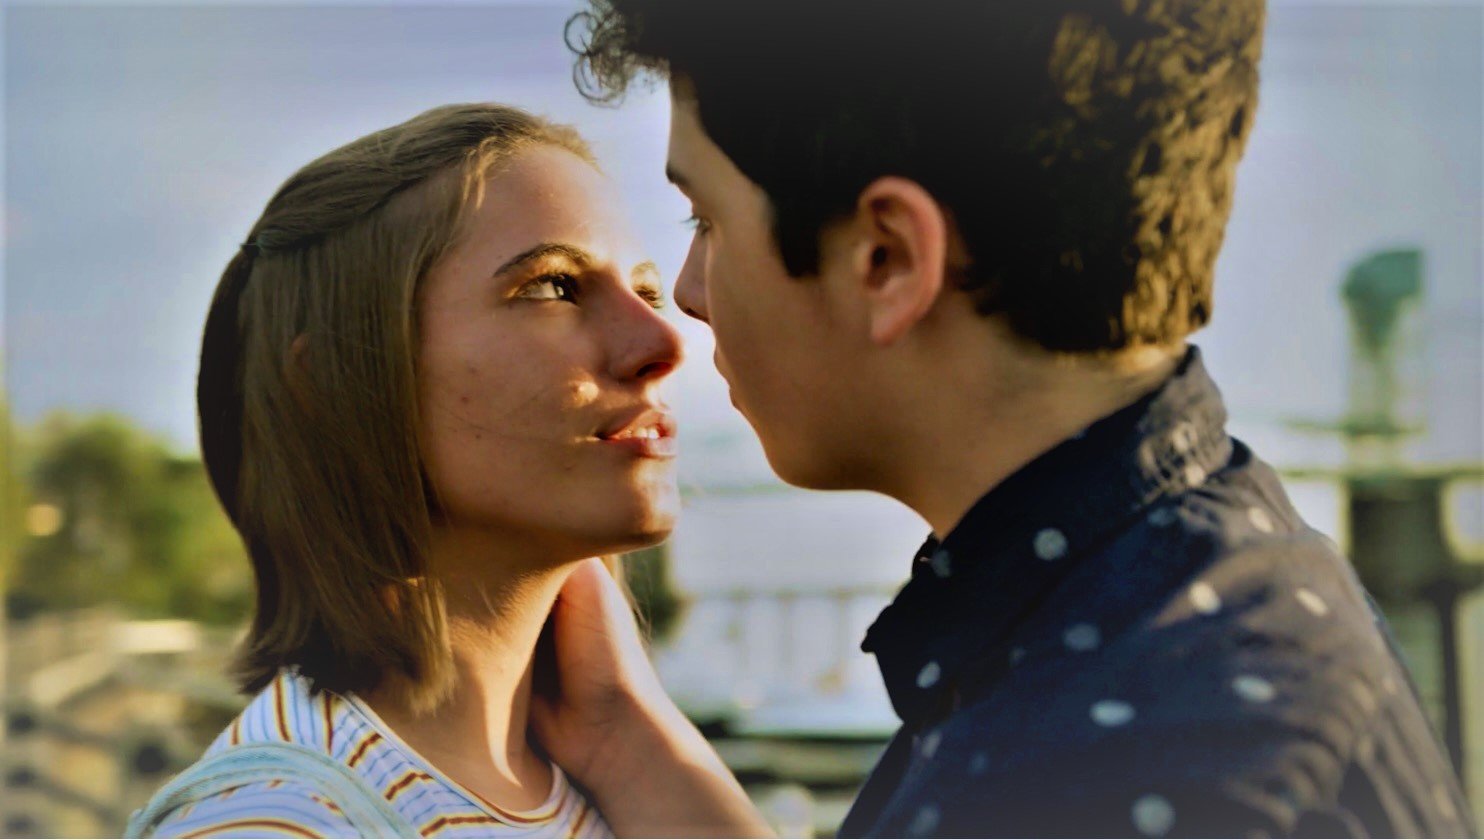 Jessi Hoadley and Jakob Gruntfest star as a couple who are reunited after years apart in "Remember Yesterday," a movie filmed in Wilmington by actor-director J.R. Rodriguez of Wilmington.